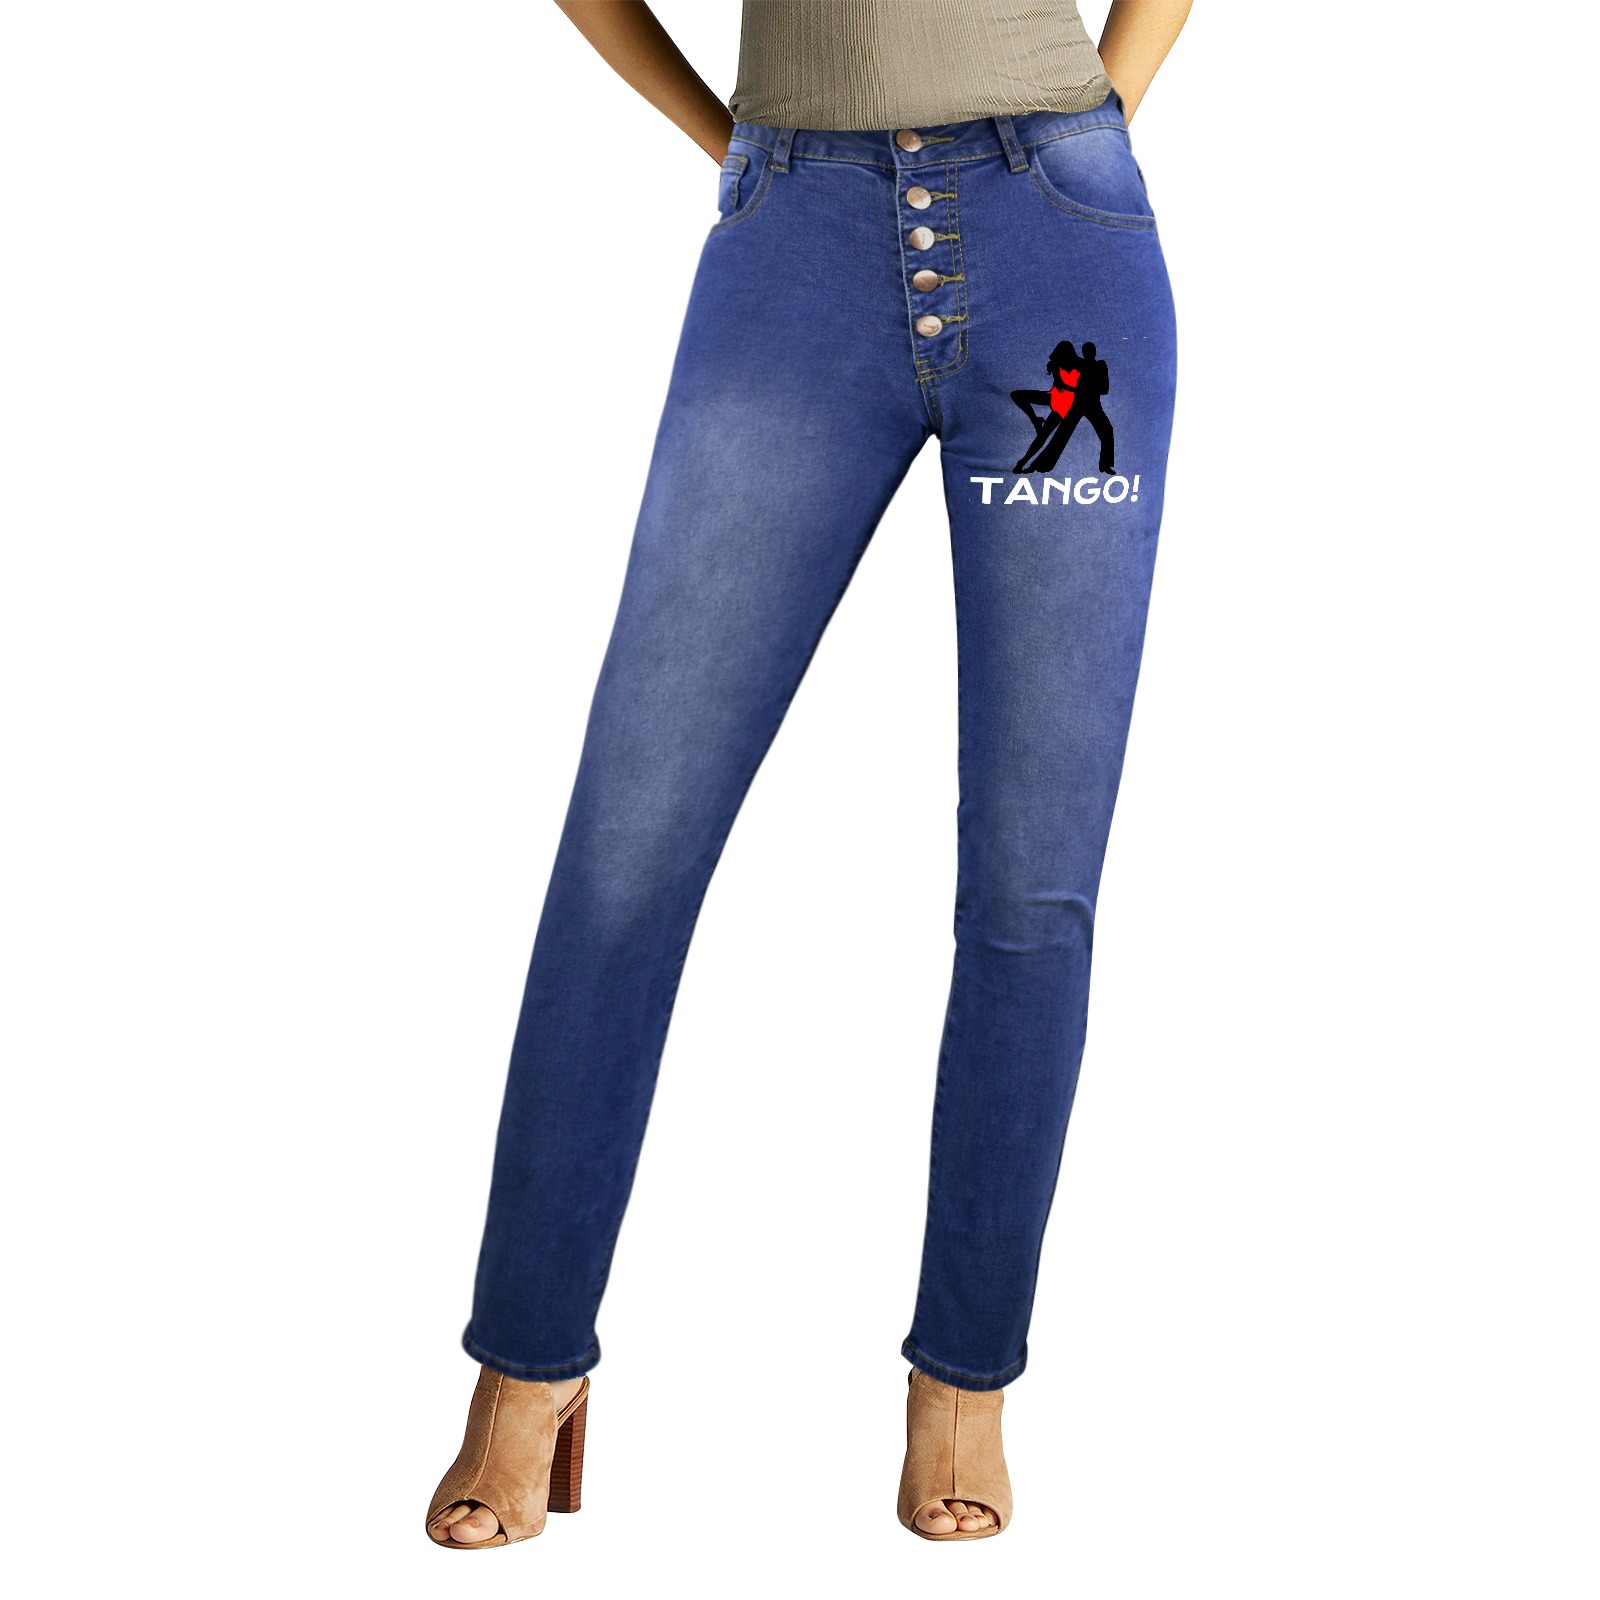 Tango white text and black silhouettes of dancers. Women's Jeans (Front&Back Printing)